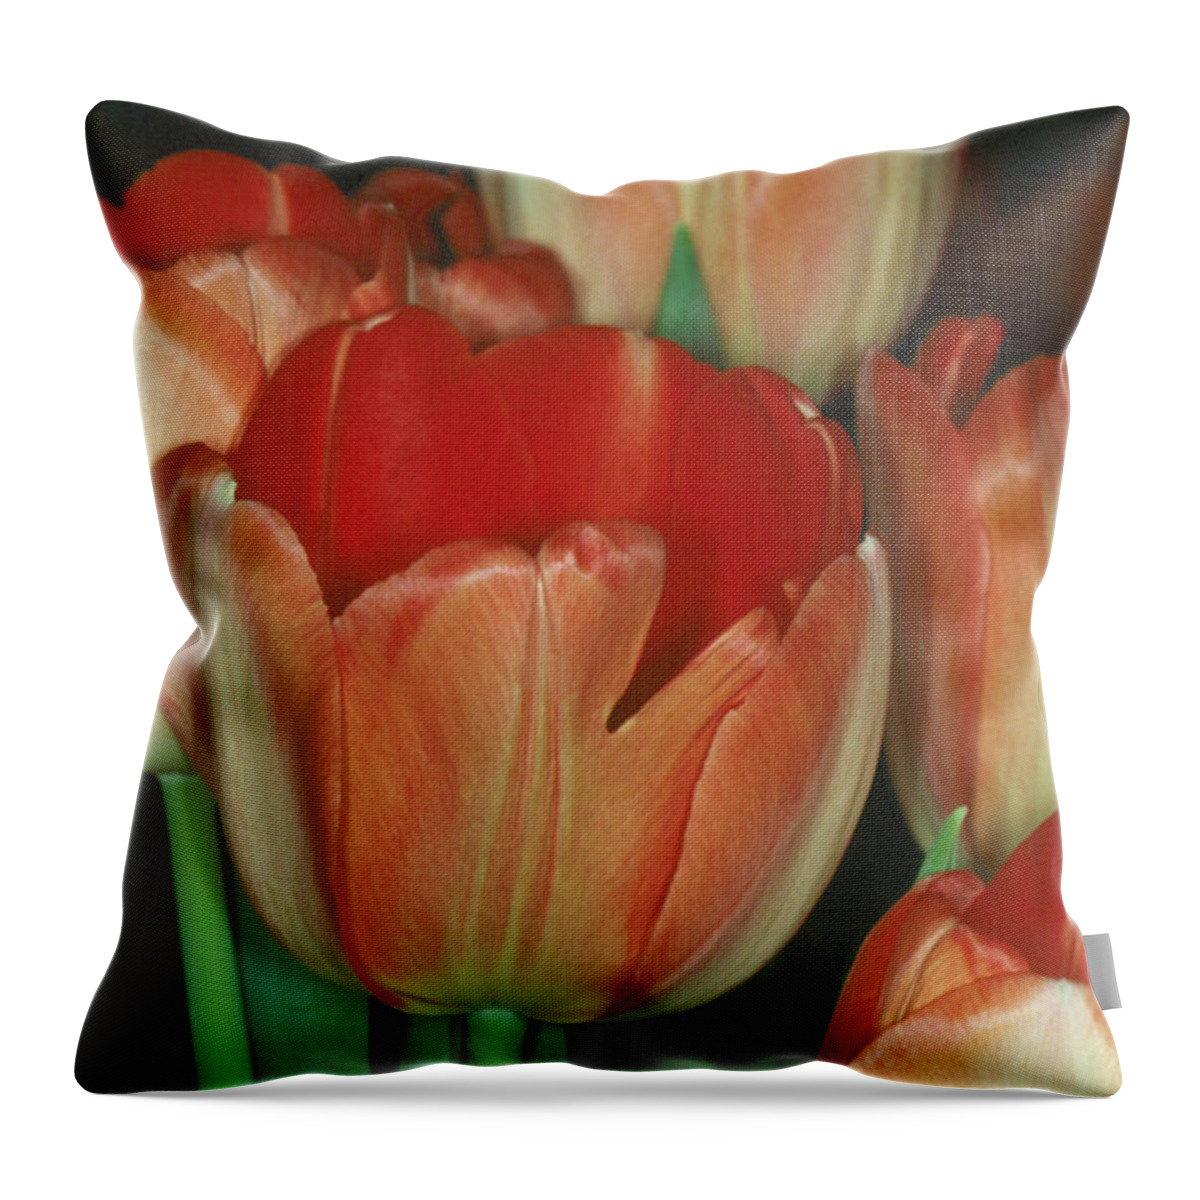 Flower Throw Pillow featuring the photograph Tulip 1 by Andy Shomock